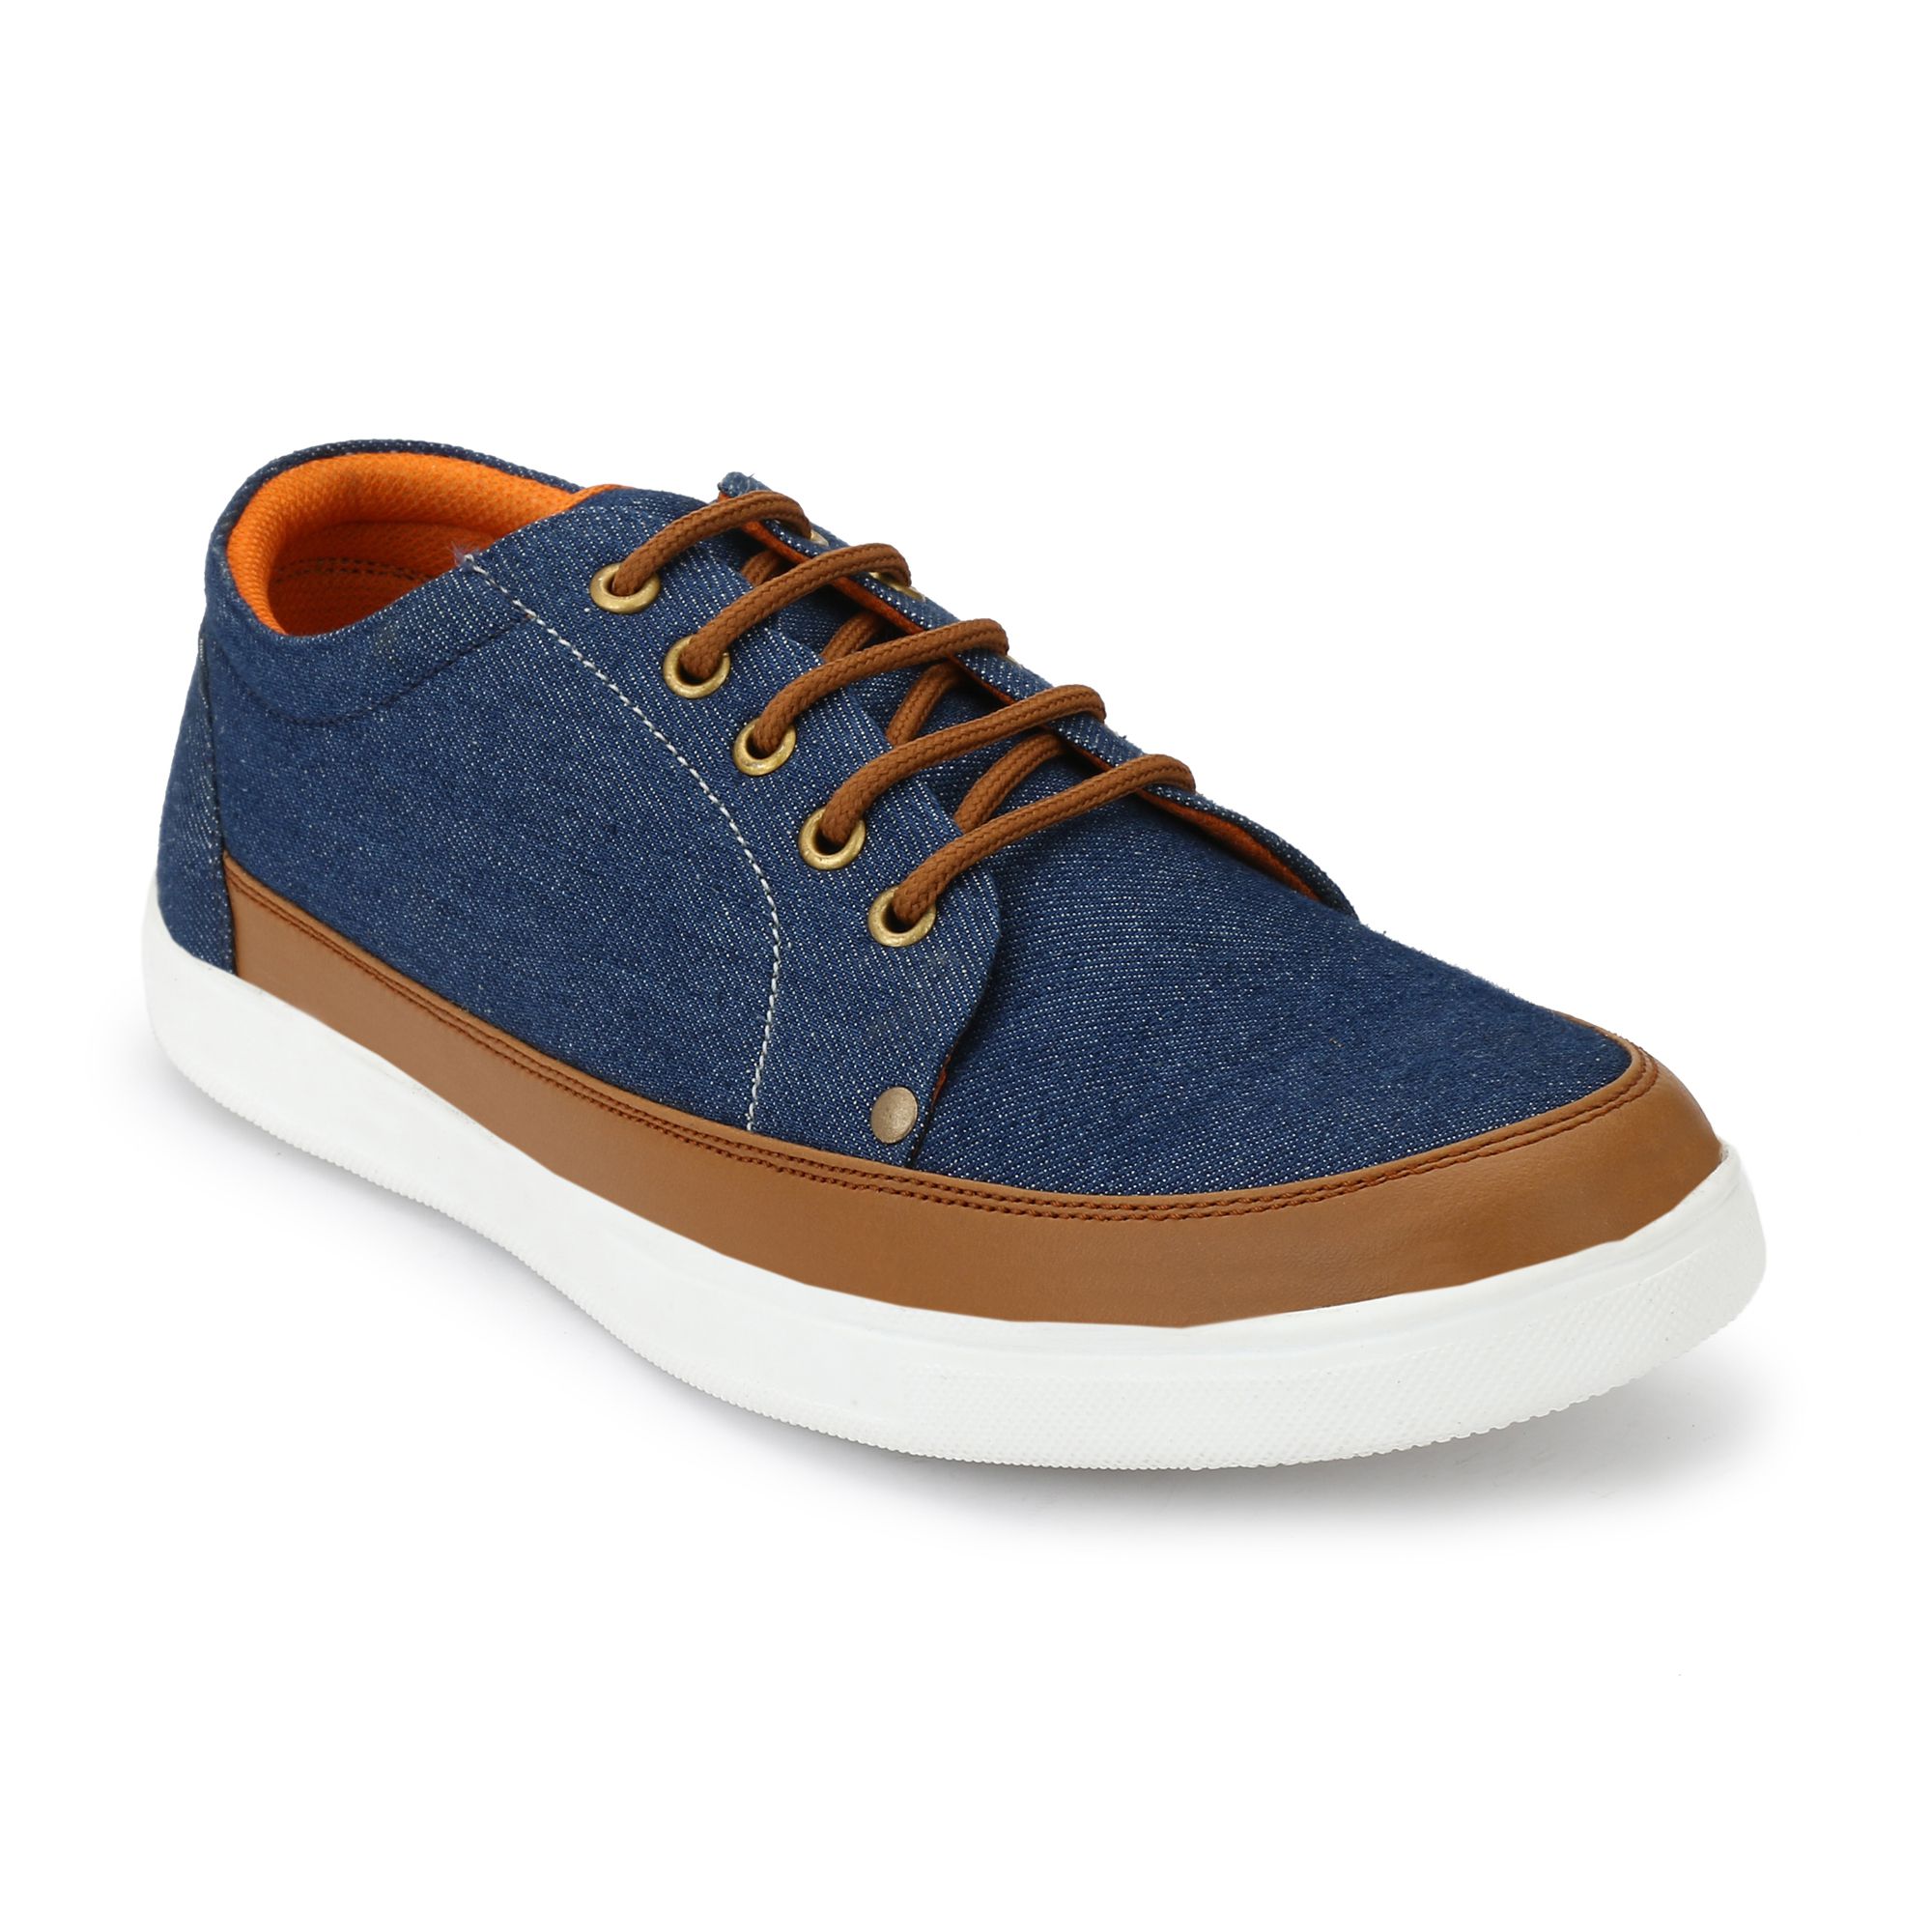 Dandy Perfect Stylish Comfortable Sneakers Blue Casual Shoes - Buy ...